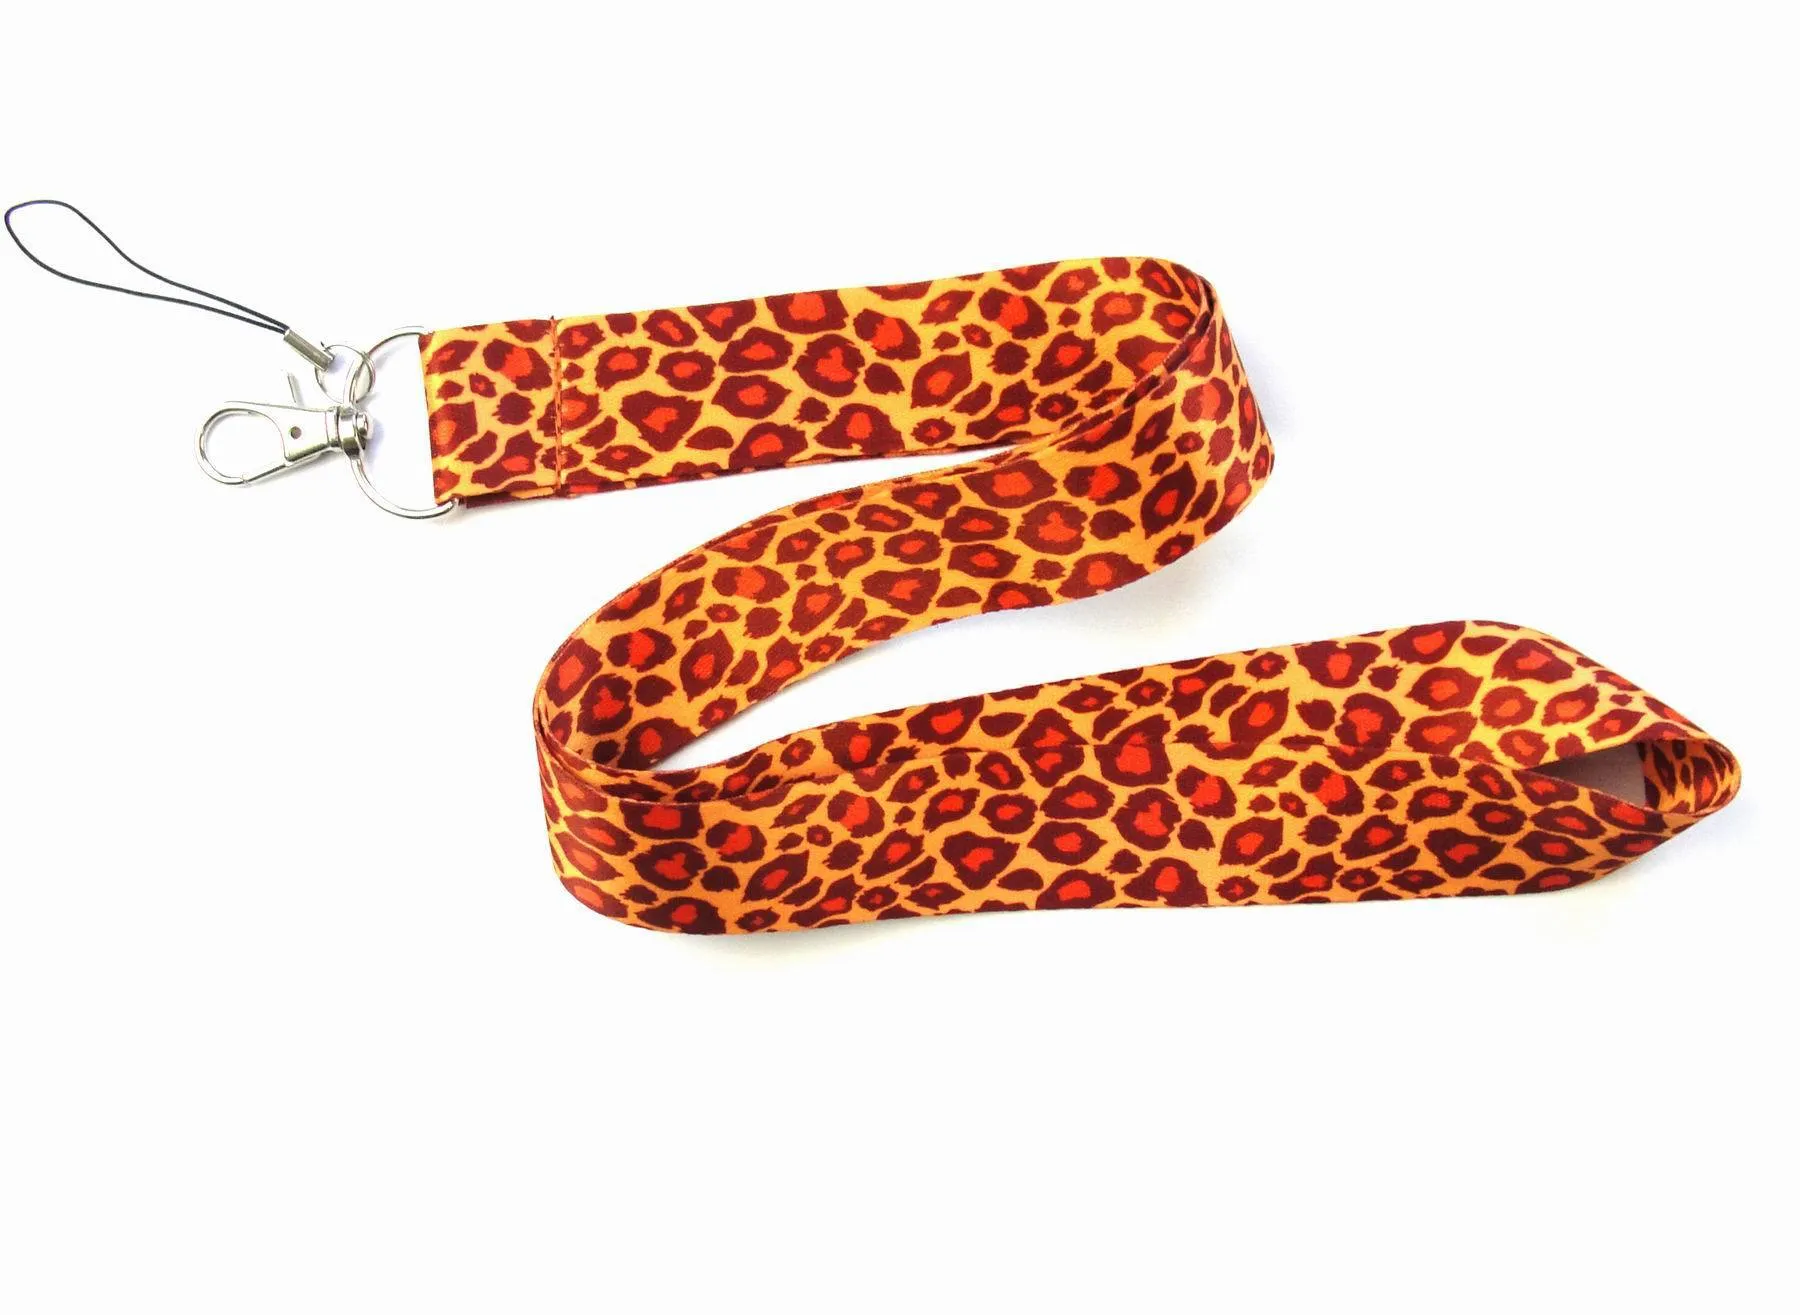 Leopard Lanyard For Mobile Phone Hang Rope Keycord USB ID Card Badge Holder Keychain DIY Lanyards